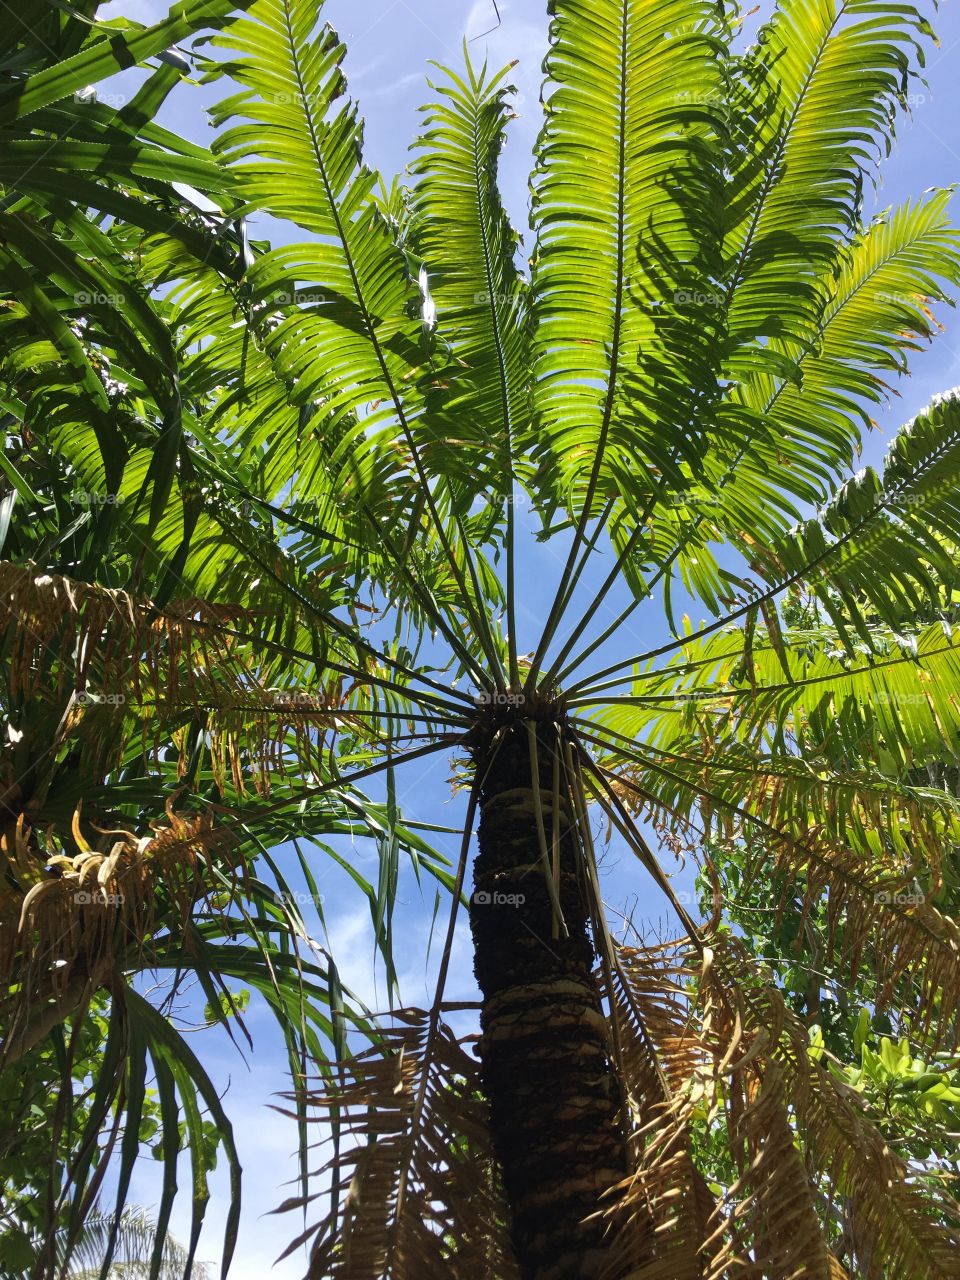 Looking up into a palm tree canopy 